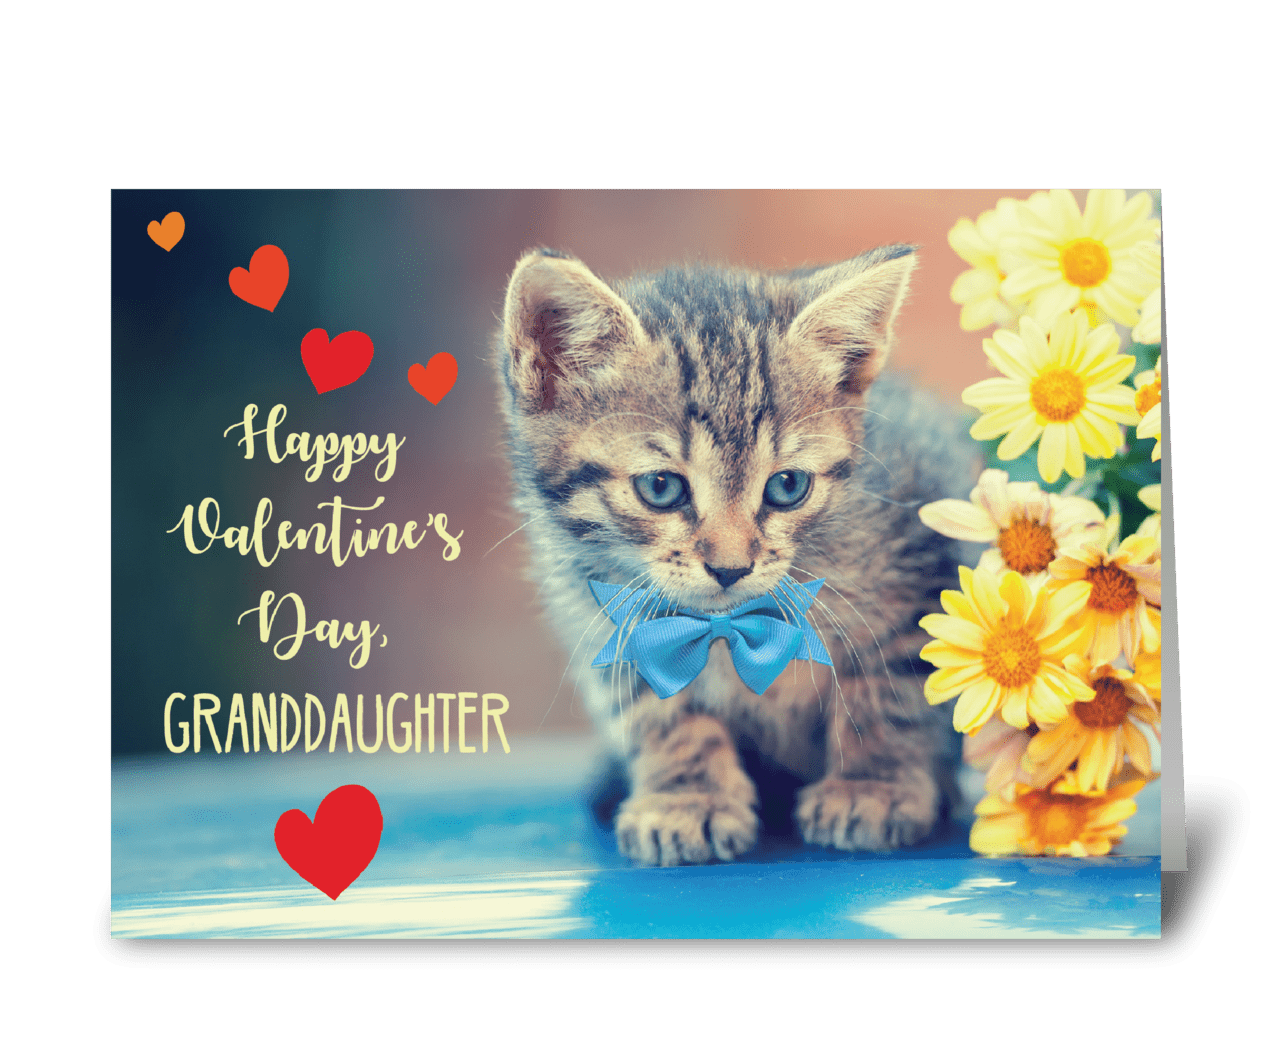 Granddaughter Love Valentine Kitten - Send this greeting card designed by Sandra Rose Designs - Card Gnome